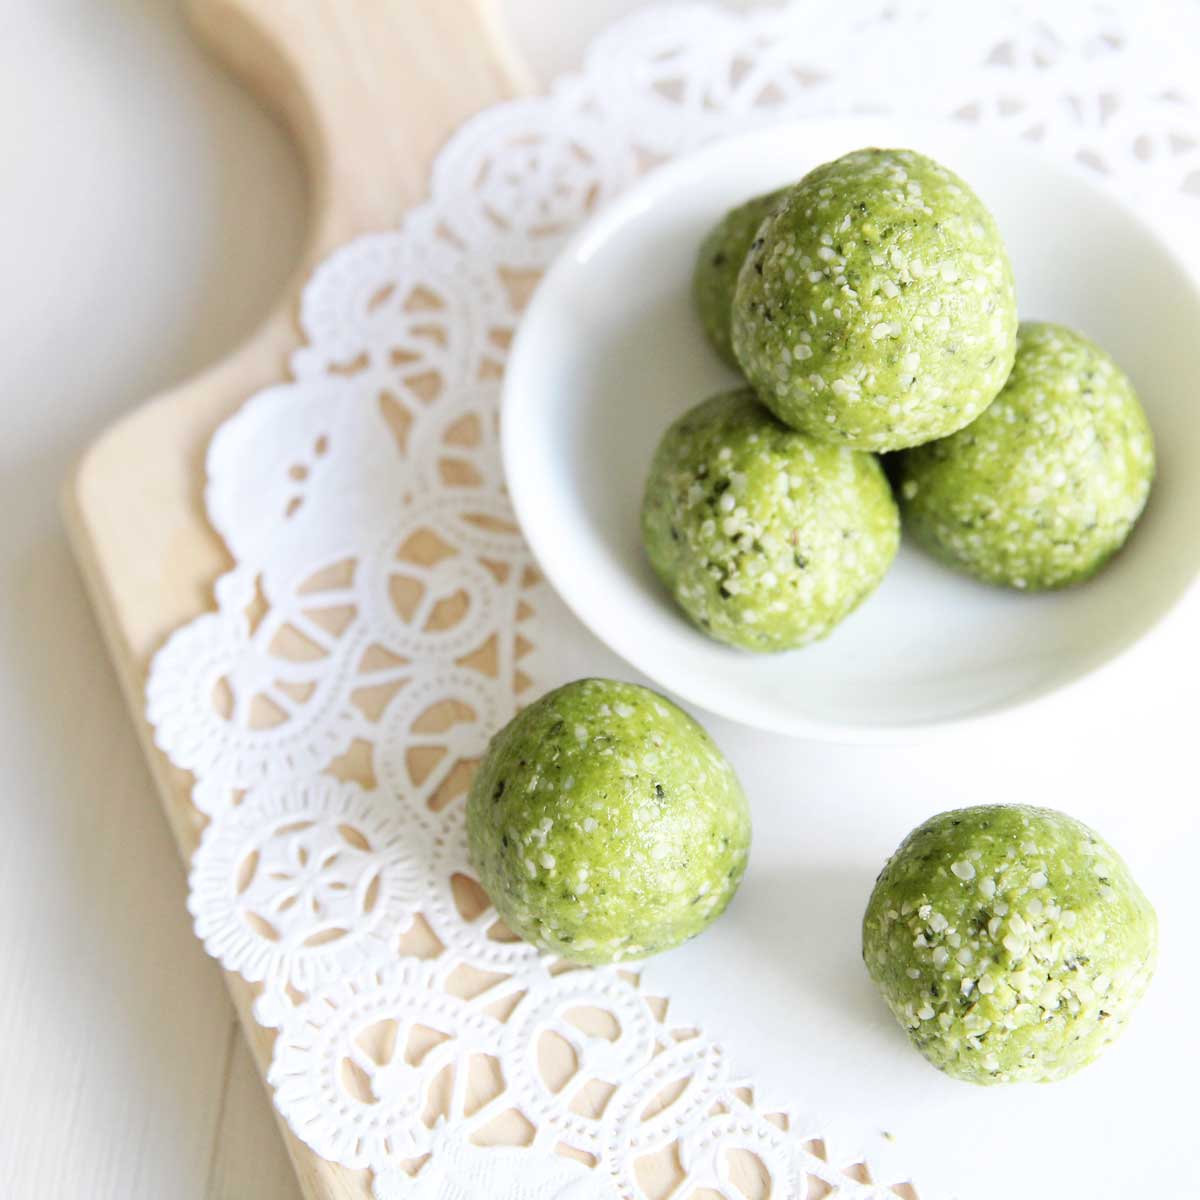 Power Packed Matcha Latte Protein Balls Recipe with Collagen Peptides - Canned Chickpea Yeast Bread